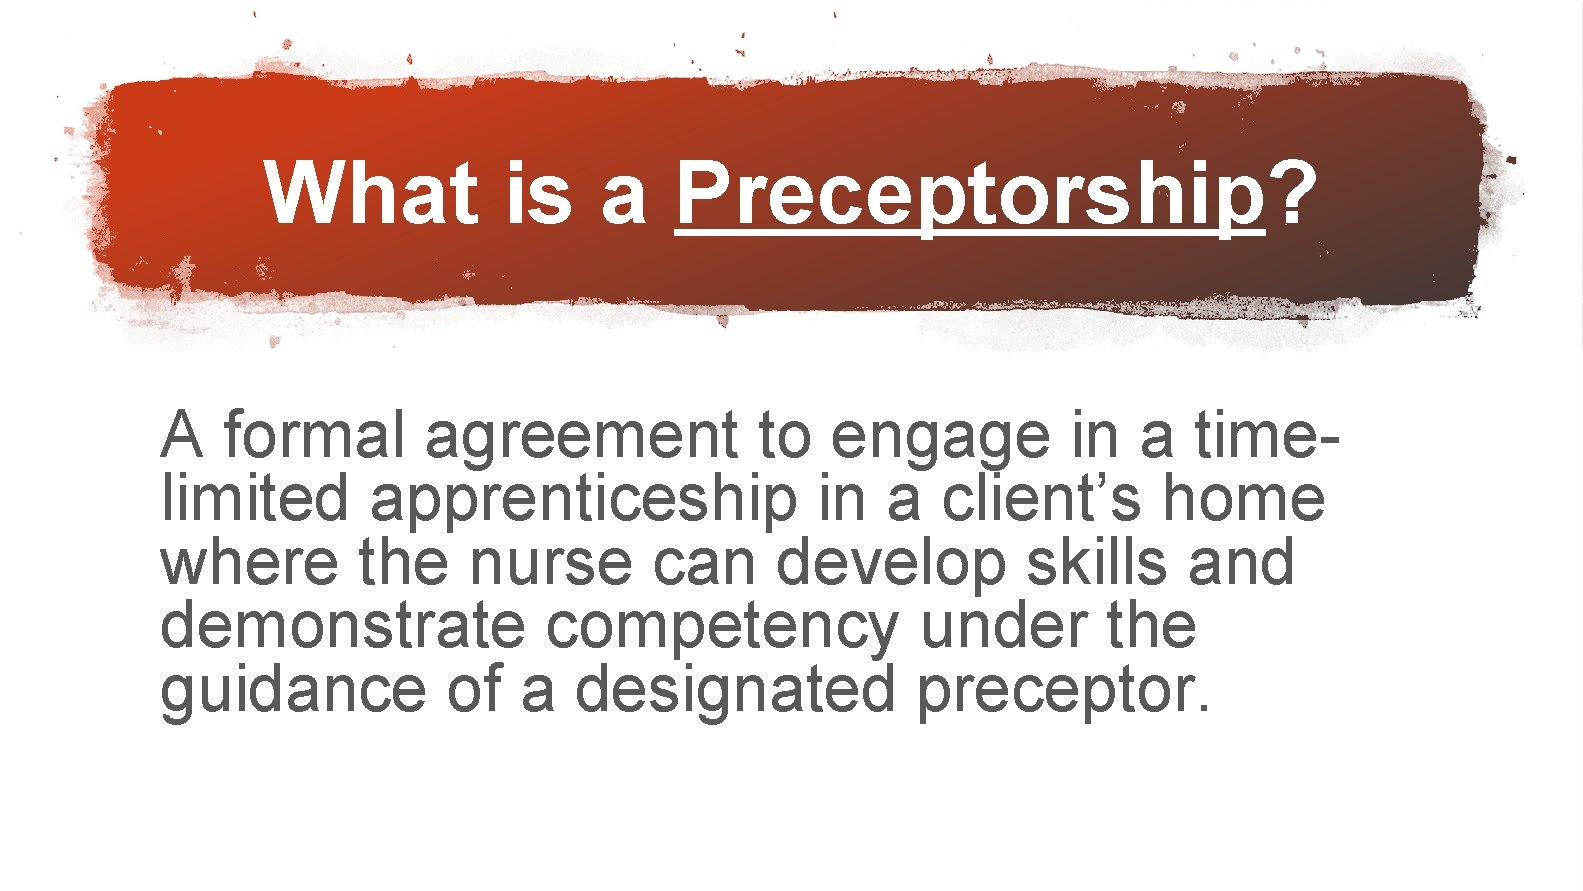 What is a Preceptorship? A formal agreement to engage in a timelimited apprenticeship in